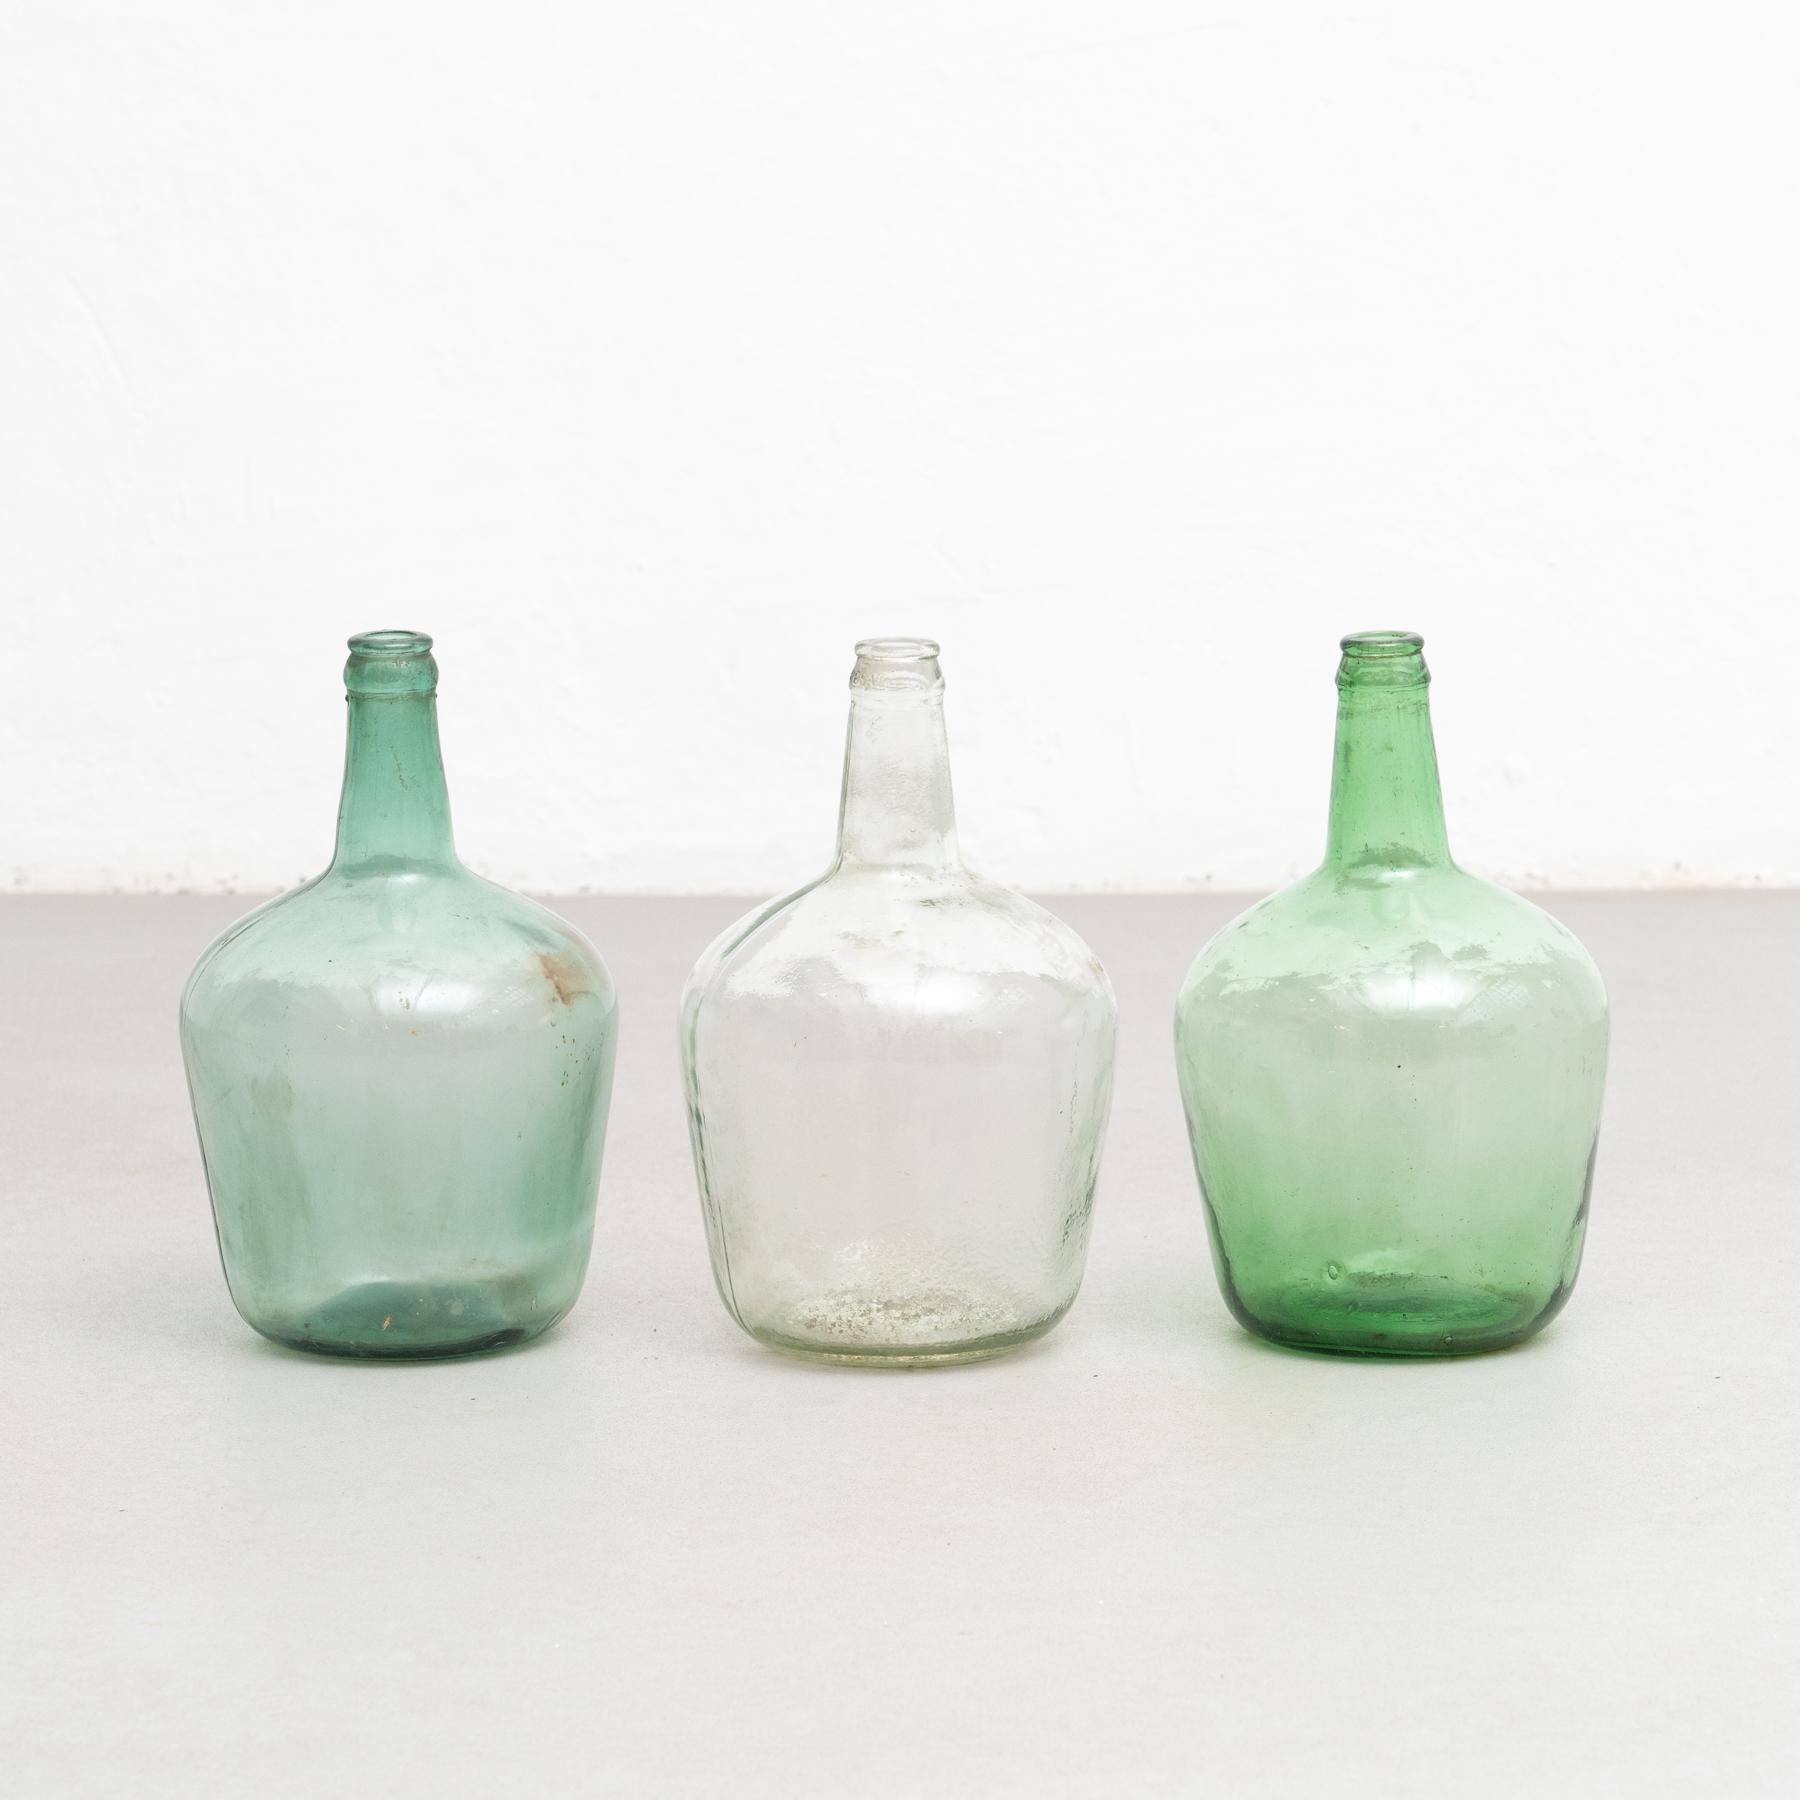 A set of three antique Demijohn glass bottles from Barcelona.

Made by unknown manufacturer in Spain, circa 1950.

In original condition with minor wear consistent of age and use, preserving a beautiful patina.

Materials:

Glass.